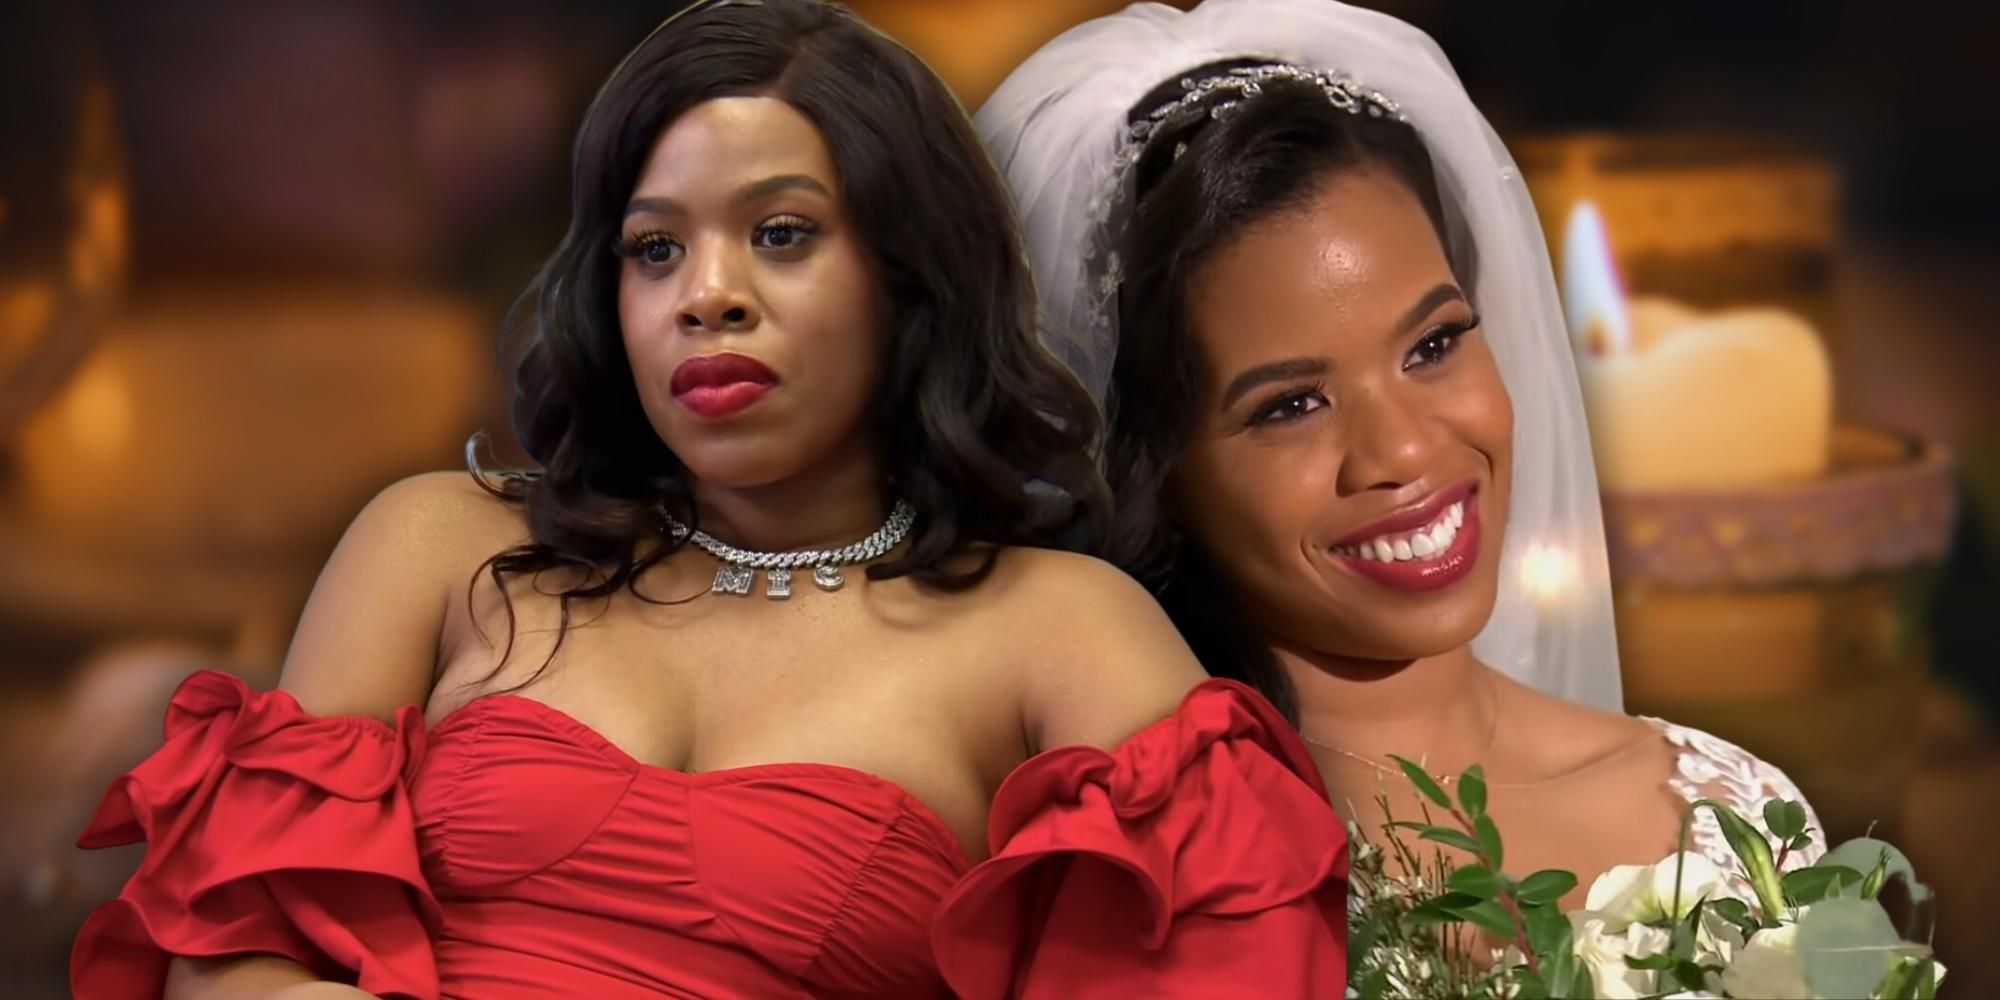 Married At First Sight: What Happened To Michaela After Season 13